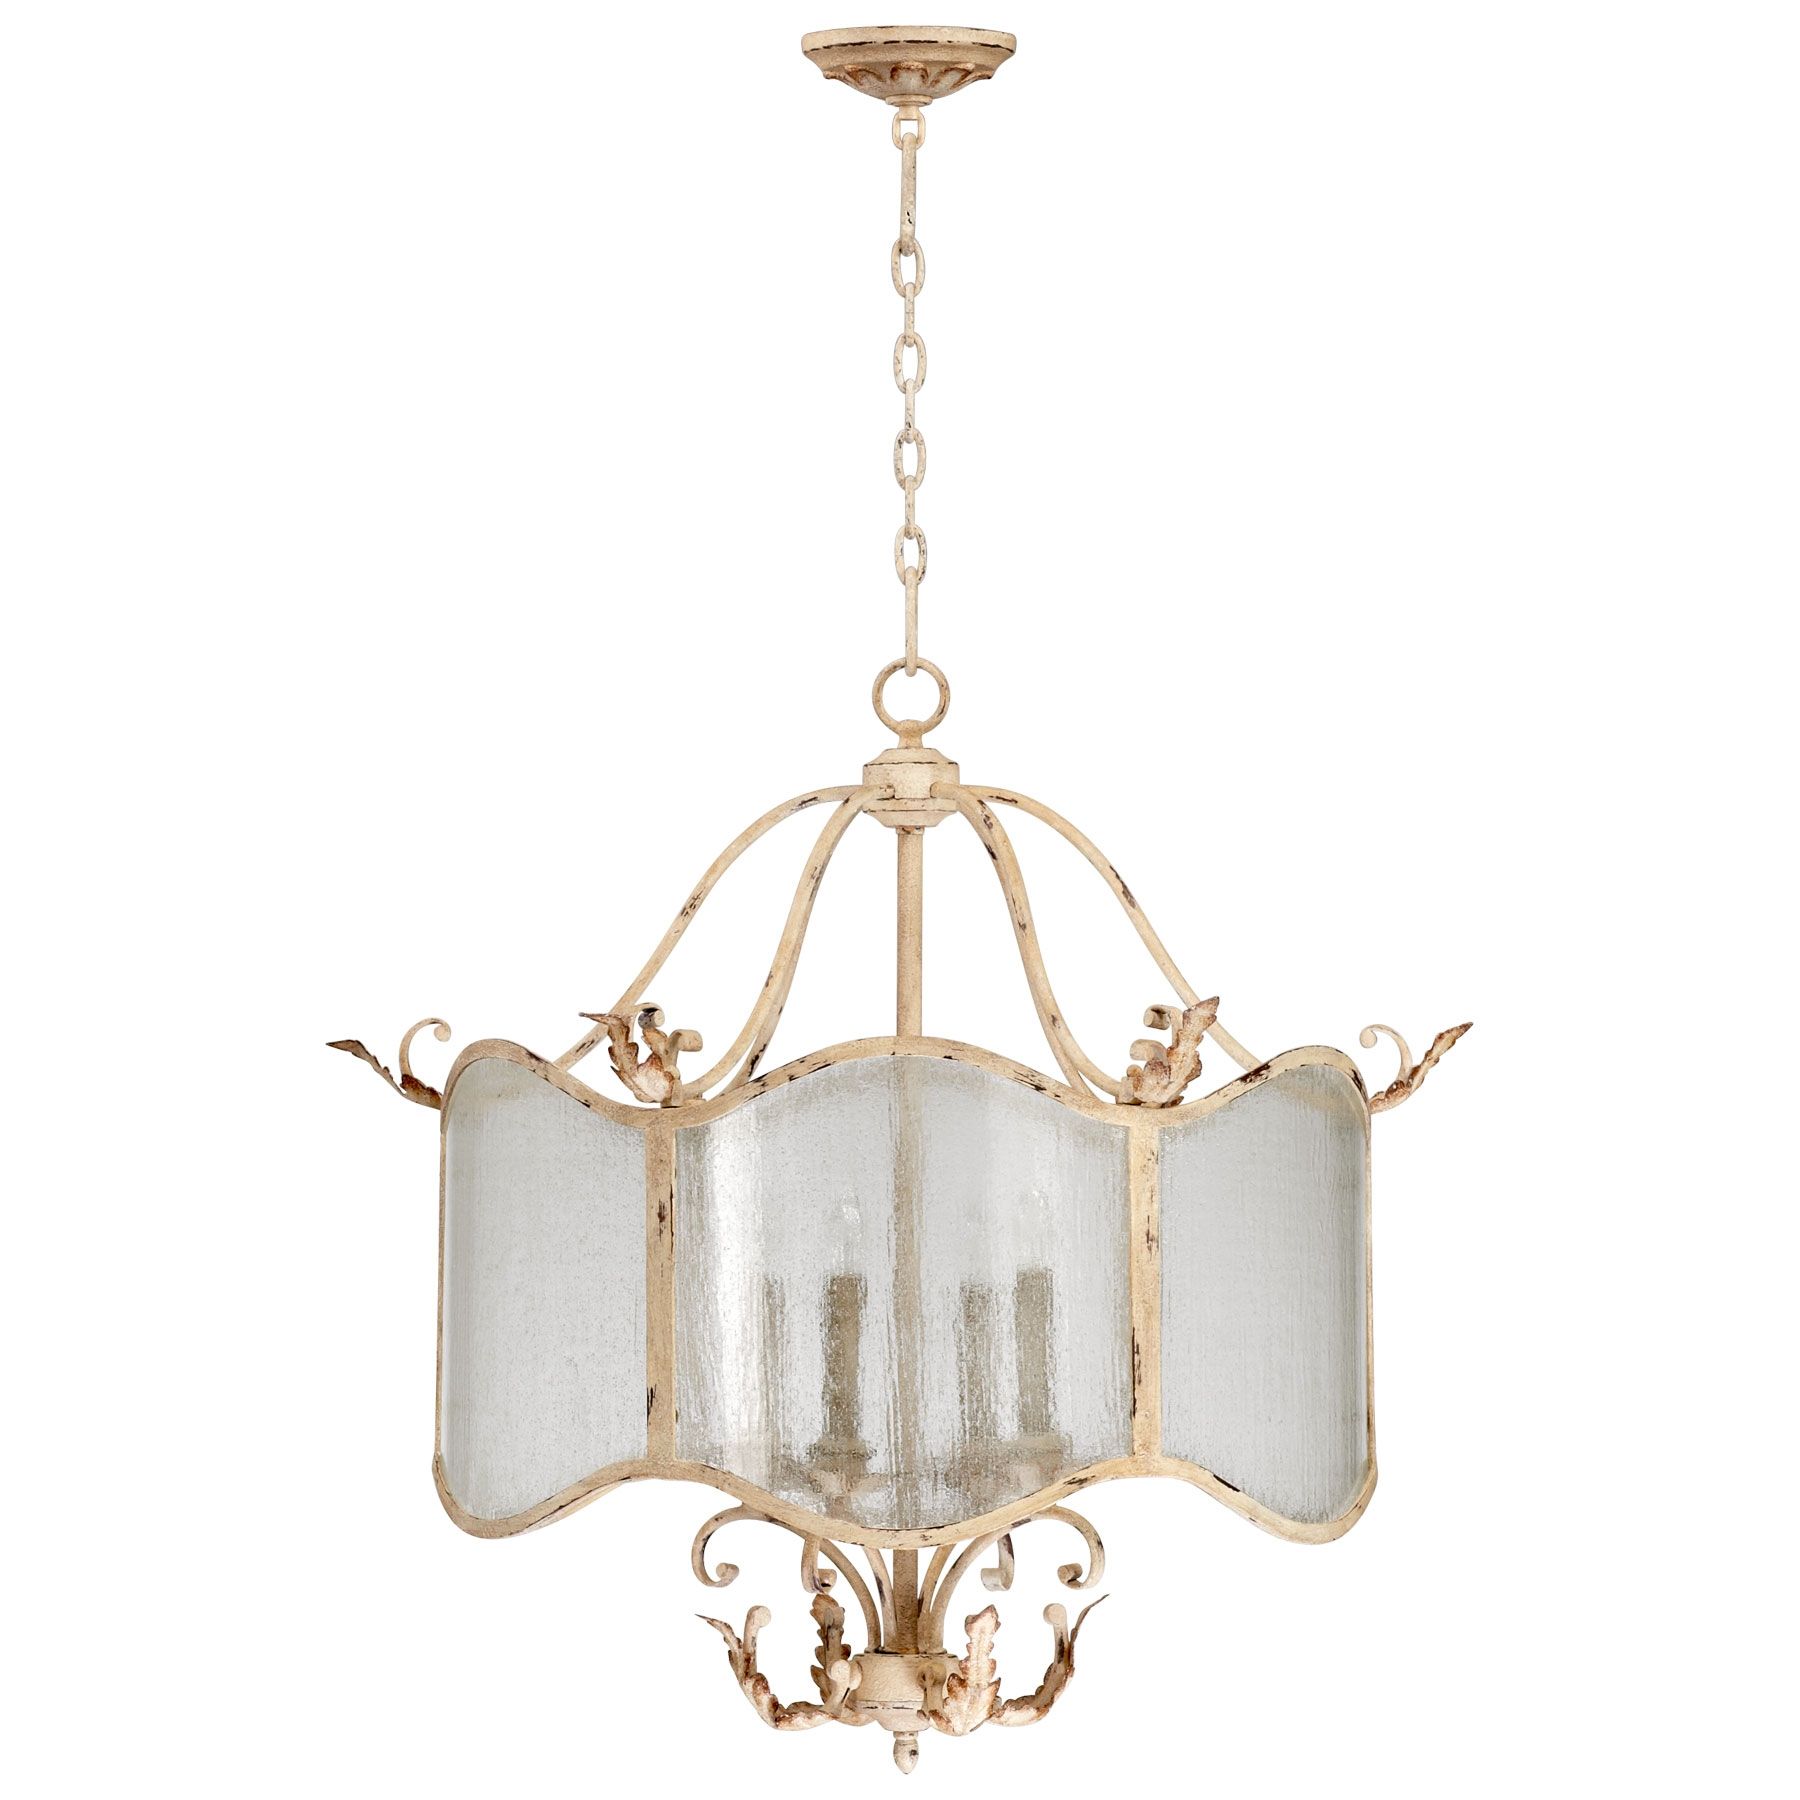 Vintage French Country Chandelier With Glass Lamp Shades And Iron Intended For French Glass Chandelier (View 10 of 12)